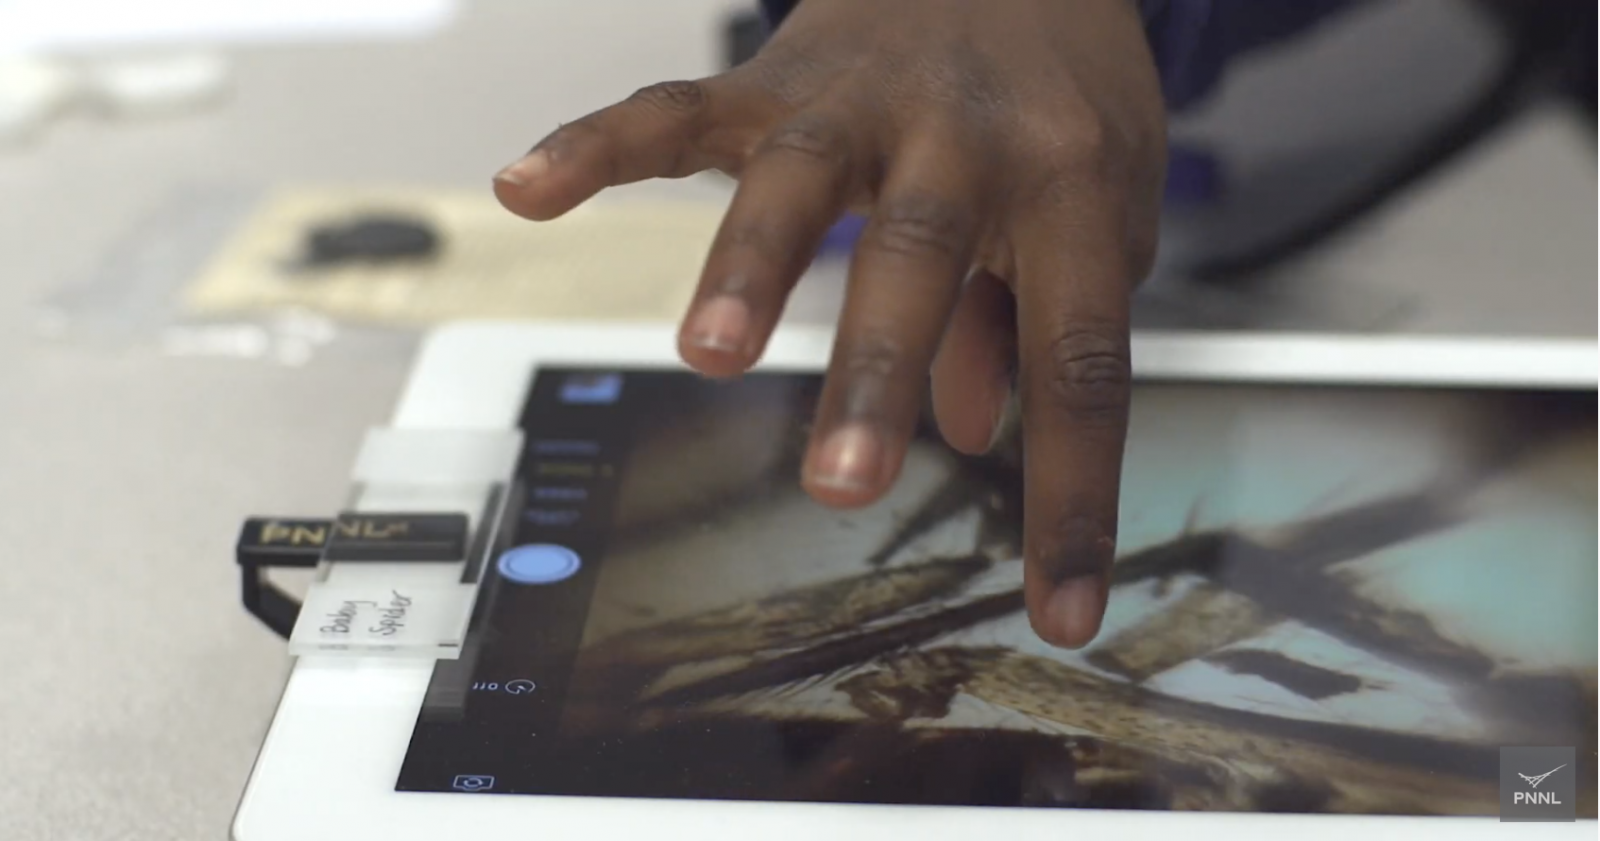 hand touching the screen of a tablet with smartphone microscope clipped to device's camera